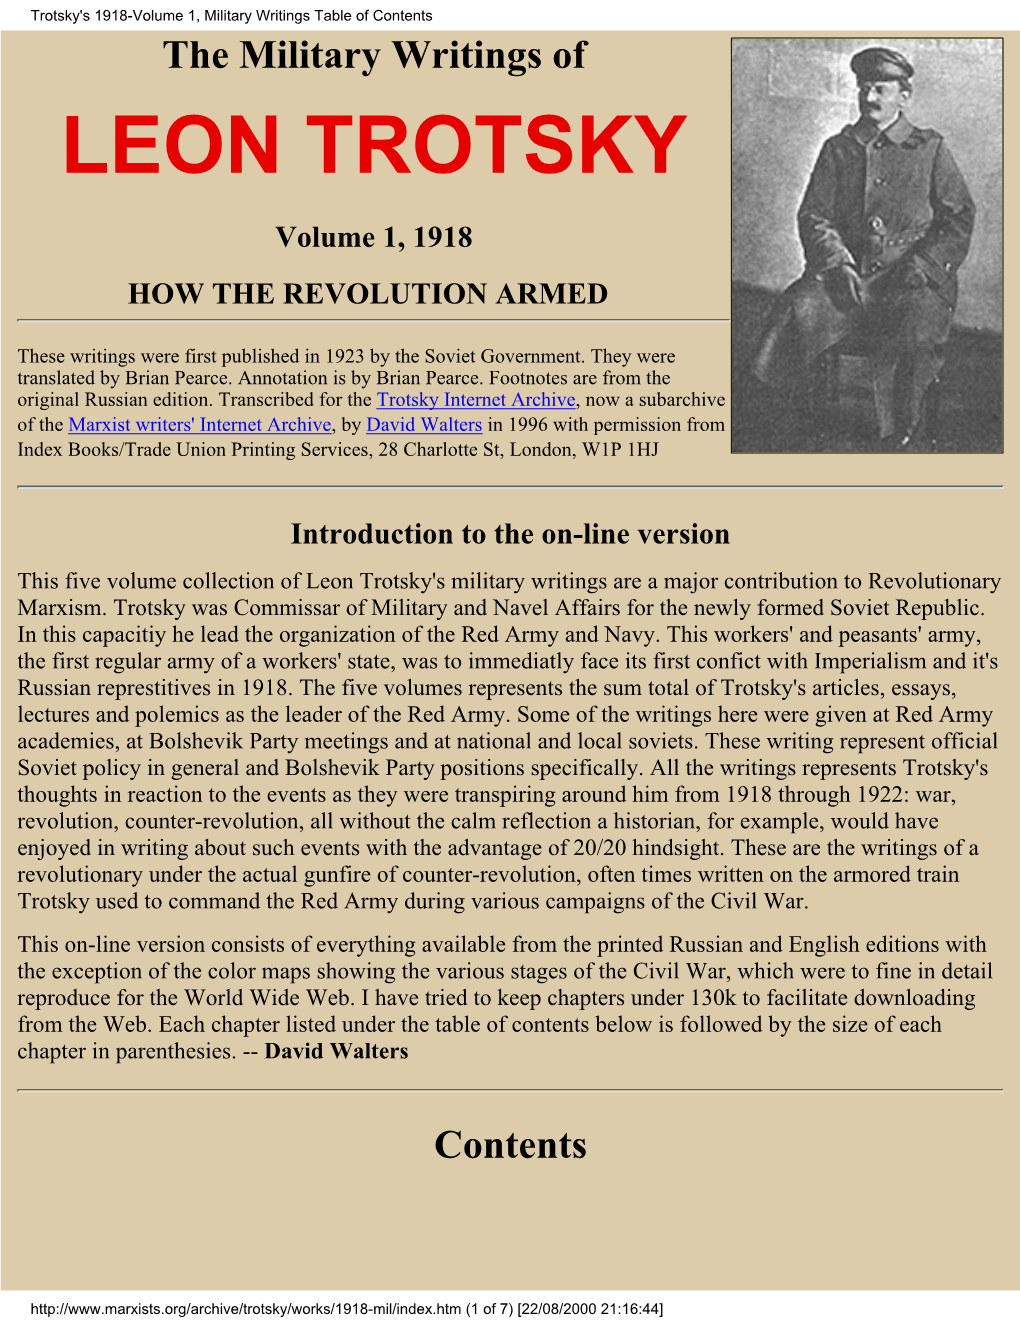 Trotsky's 1918-Volume 1, Military Writings Table of Contents the Military Writings of LEON TROTSKY